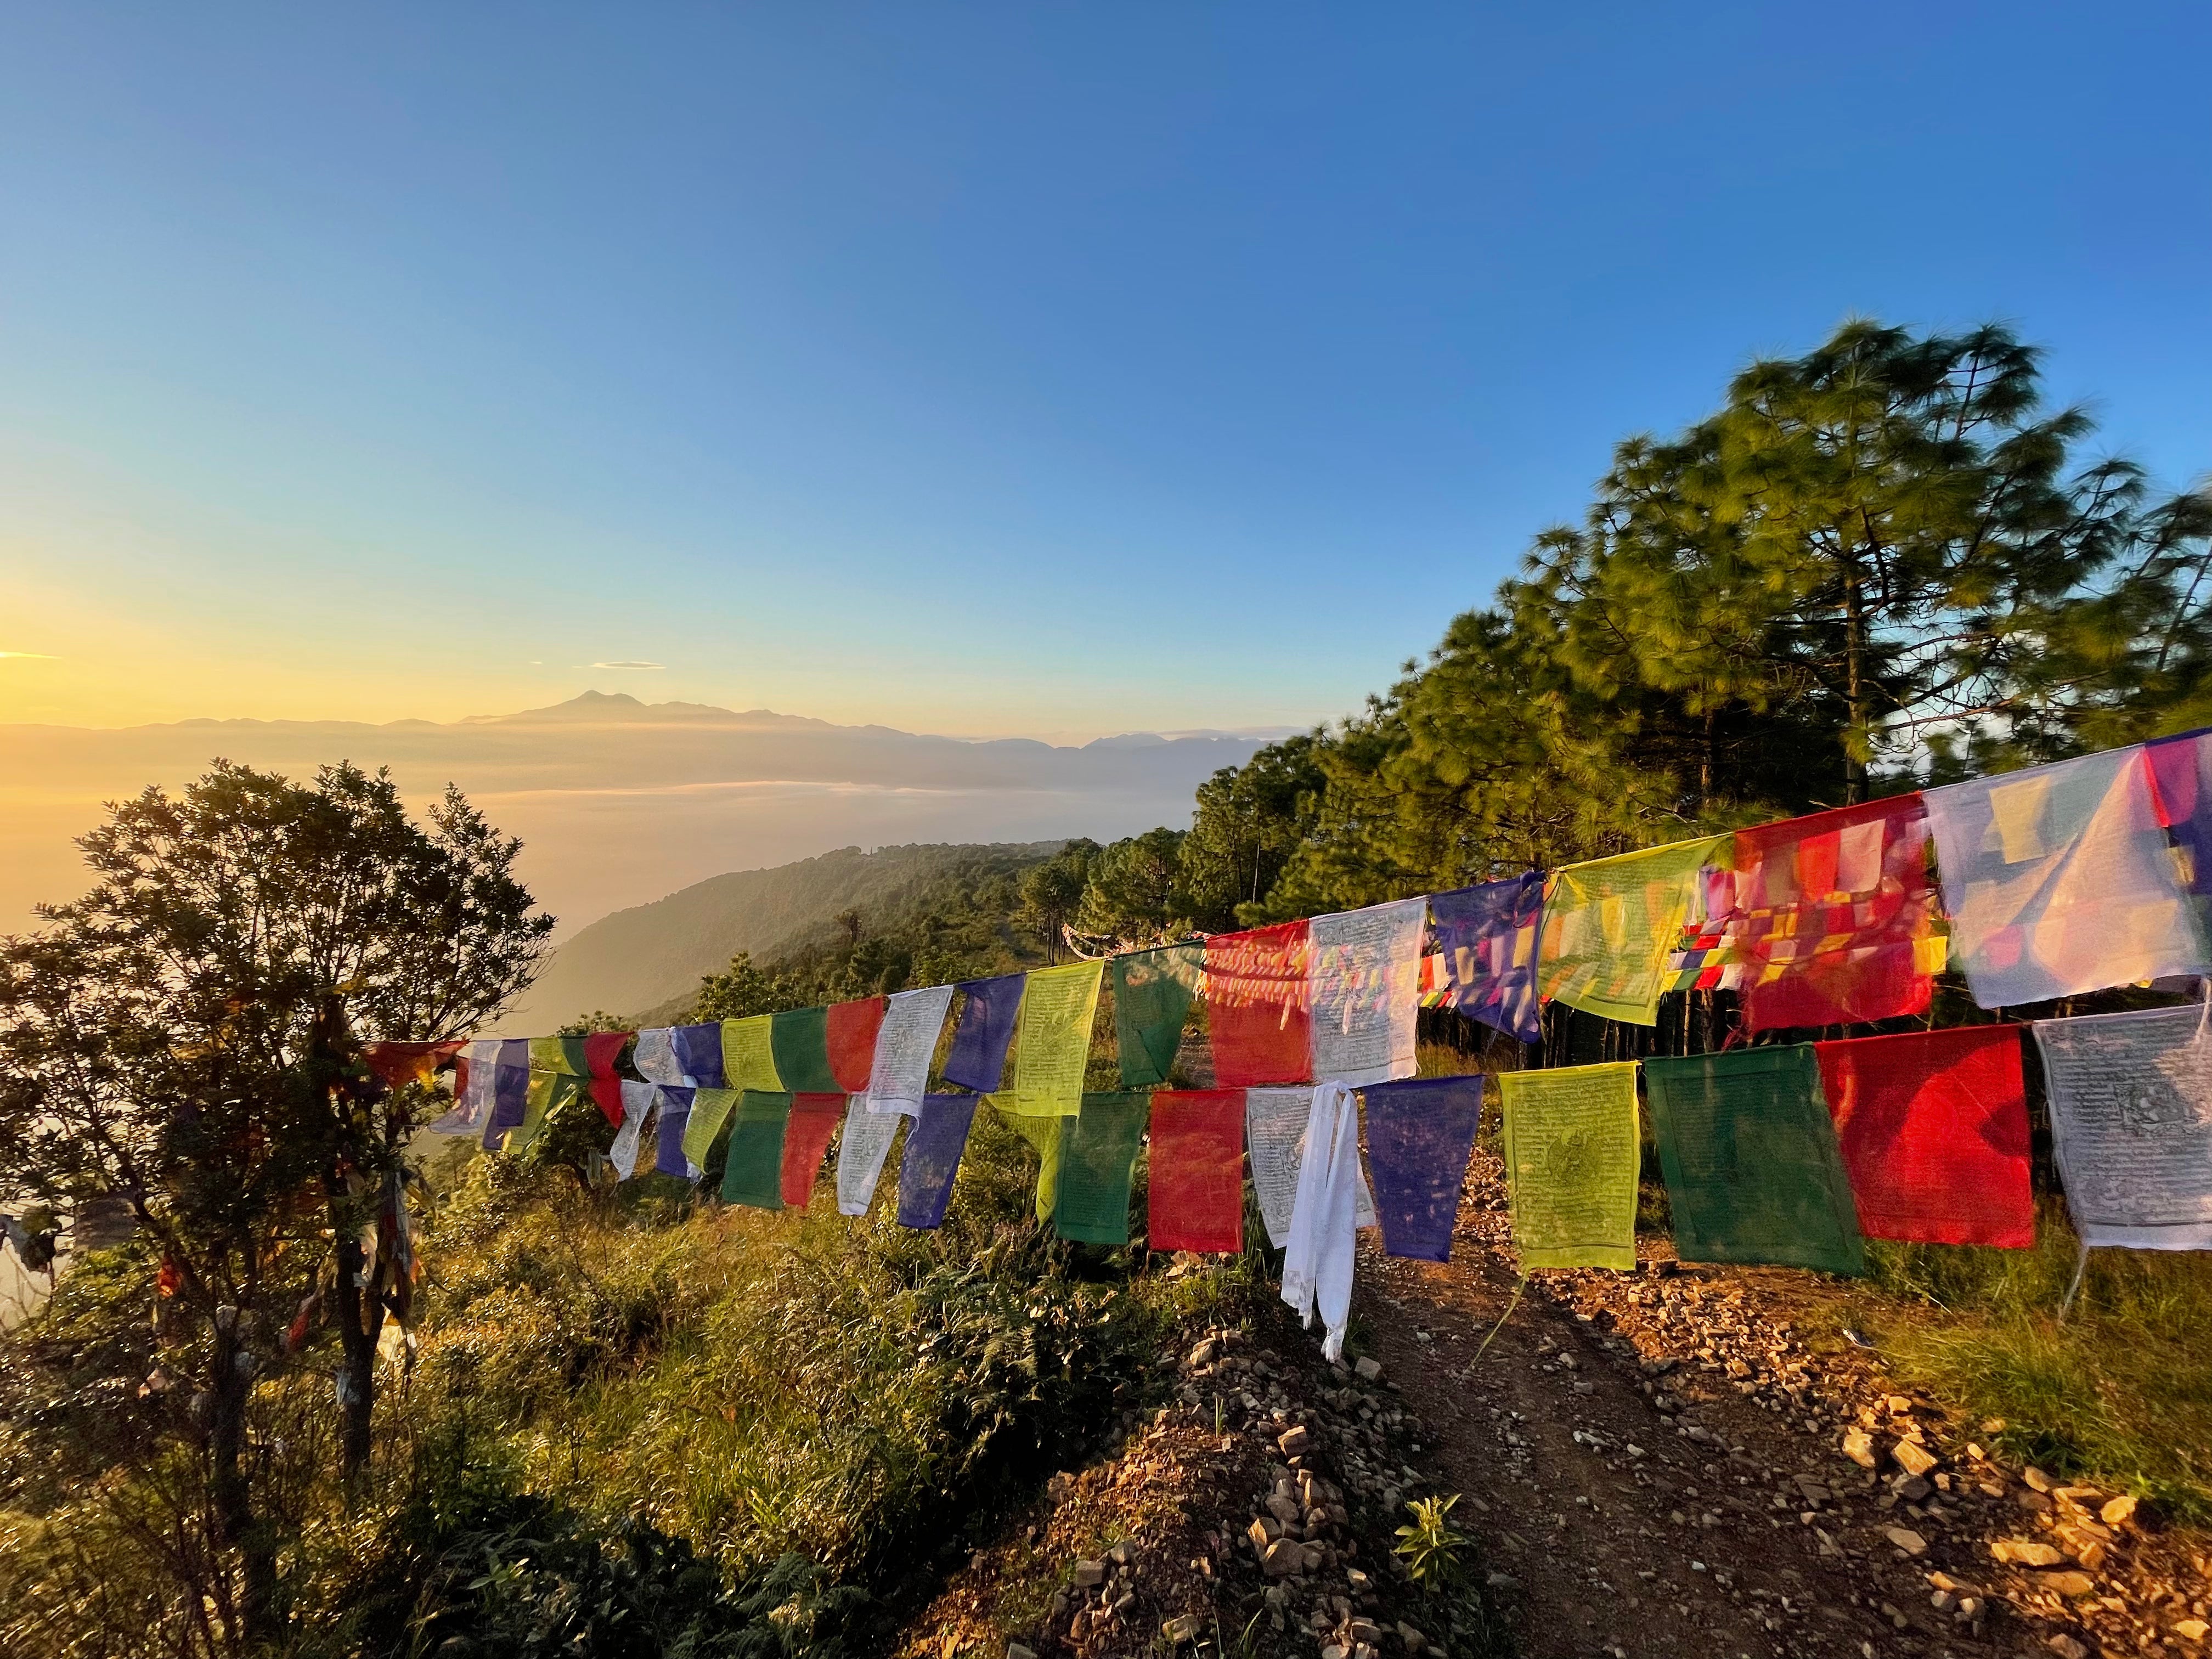 Prayer flags over a hiking track in Nepal during an epic sunrise